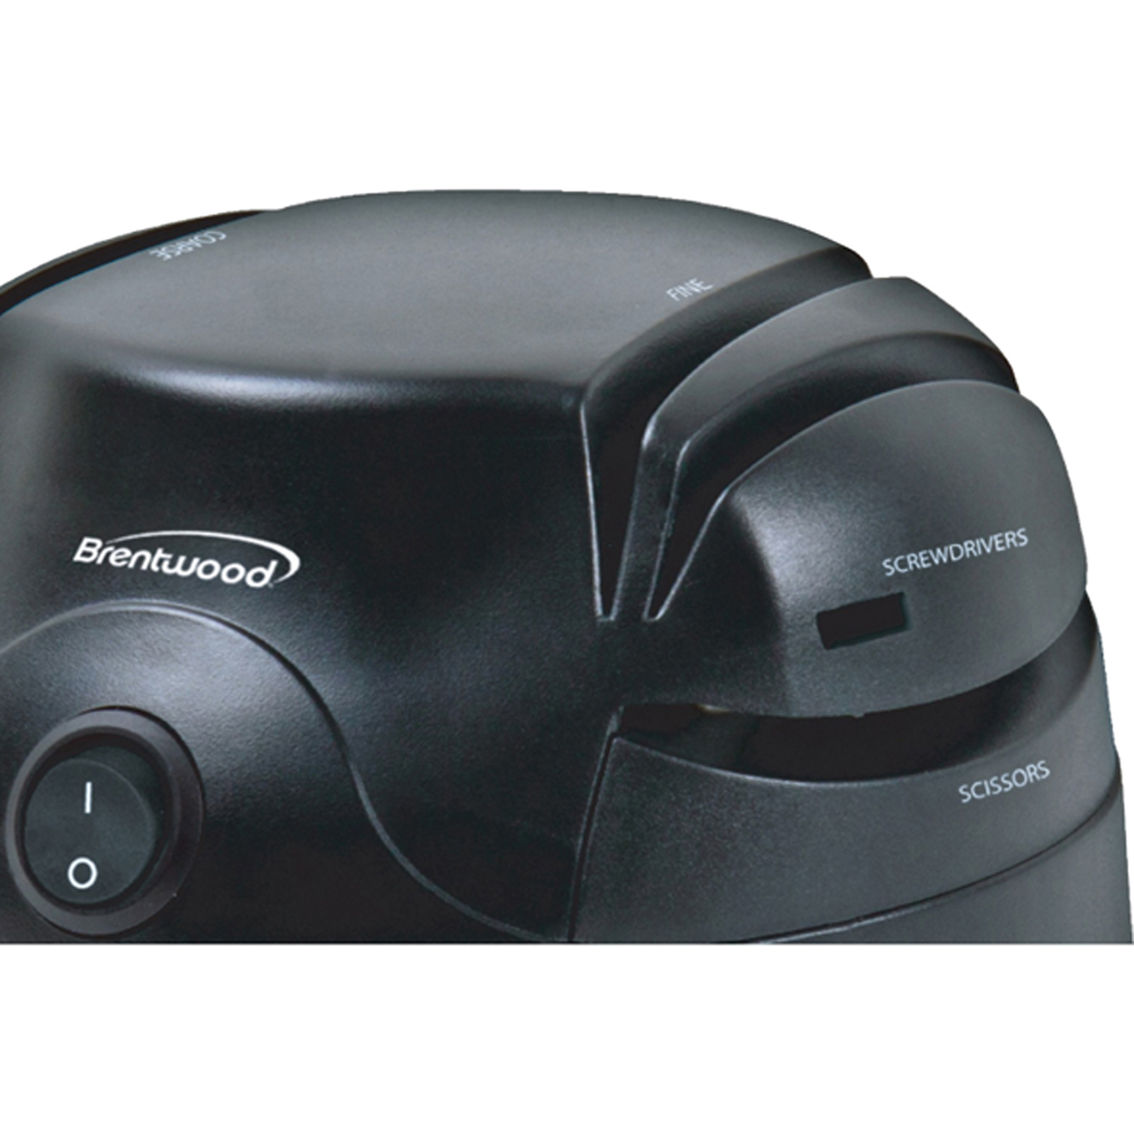 Brentwood Electric Knife and Tool Sharpener - Image 5 of 5